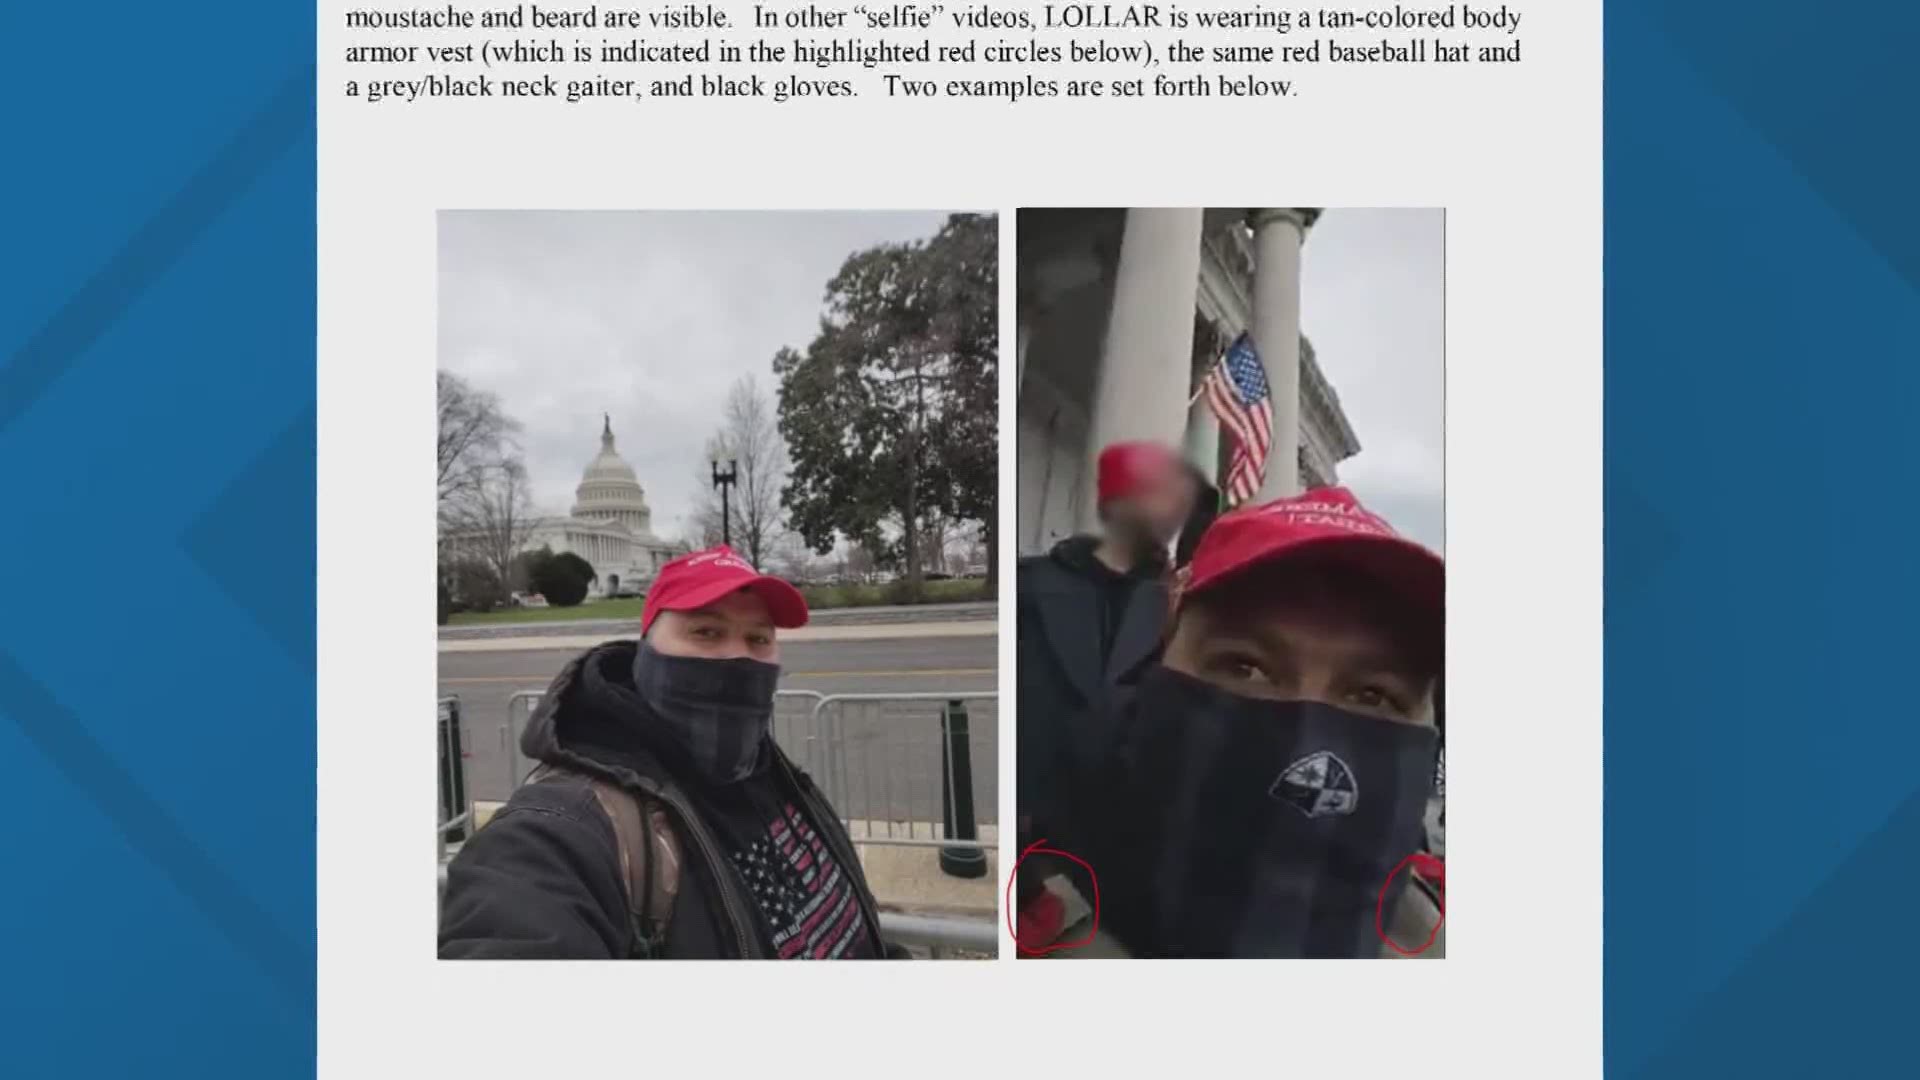 Like other members of the Capitol mob, Joshua Lollar posted selfies and videos bragging that he was breaching the Capitol and fighting with police.